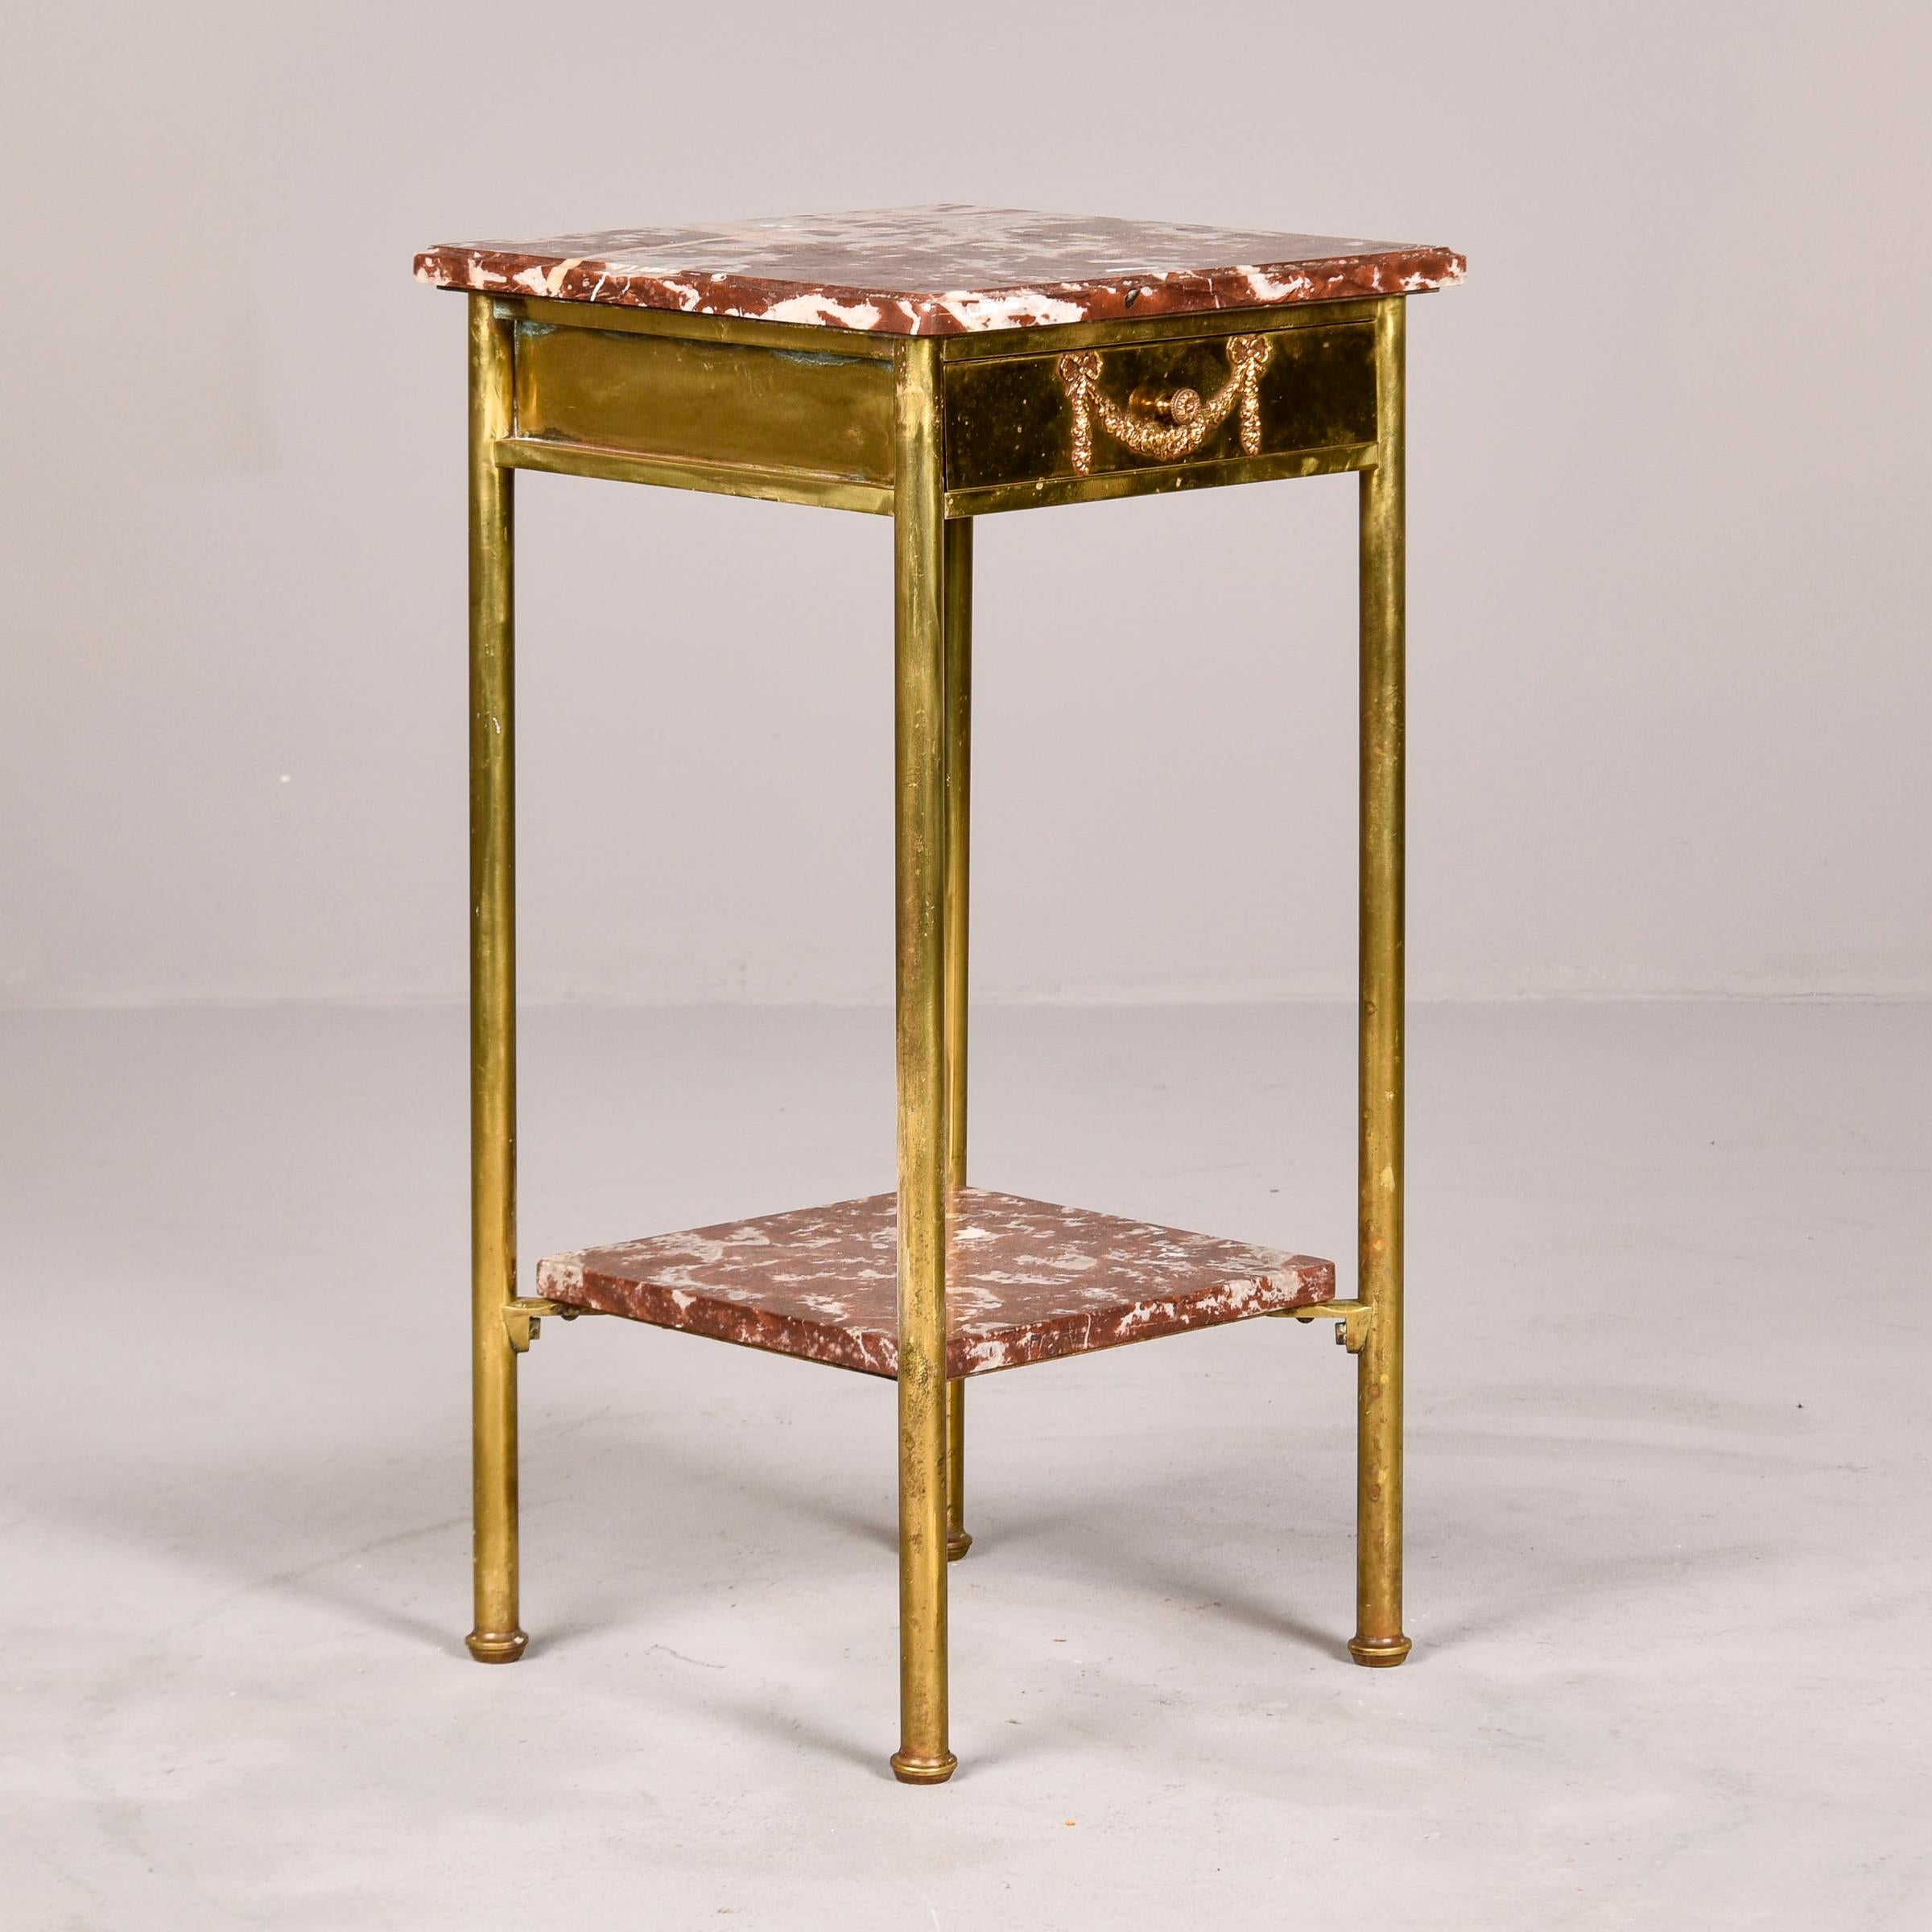 Circa 1910 French brass side table with marble top and marble lower tier. Small center drawer has dovetail construction and decorative repousse detail with bow-topped swag. Brass legs and marble top and lower shelf in shades of rusty brown with